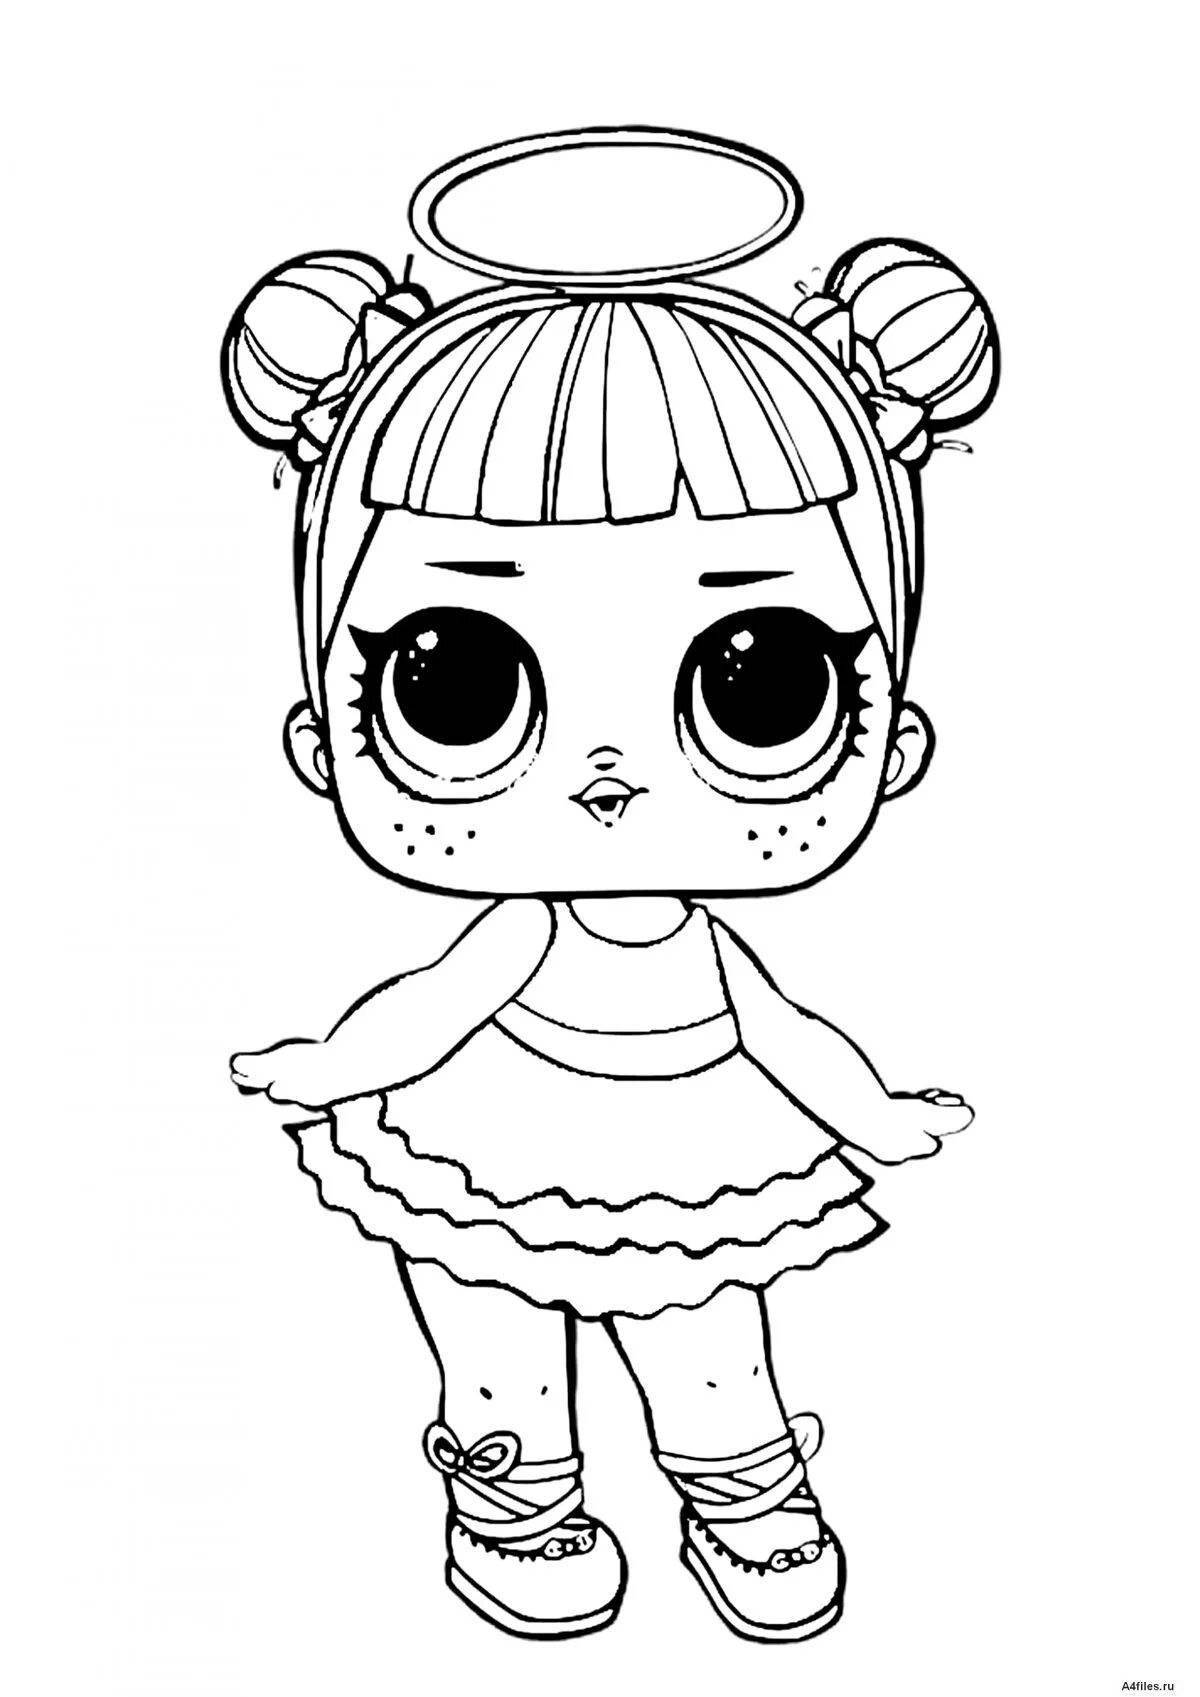 Funny doll lola coloring book for kids